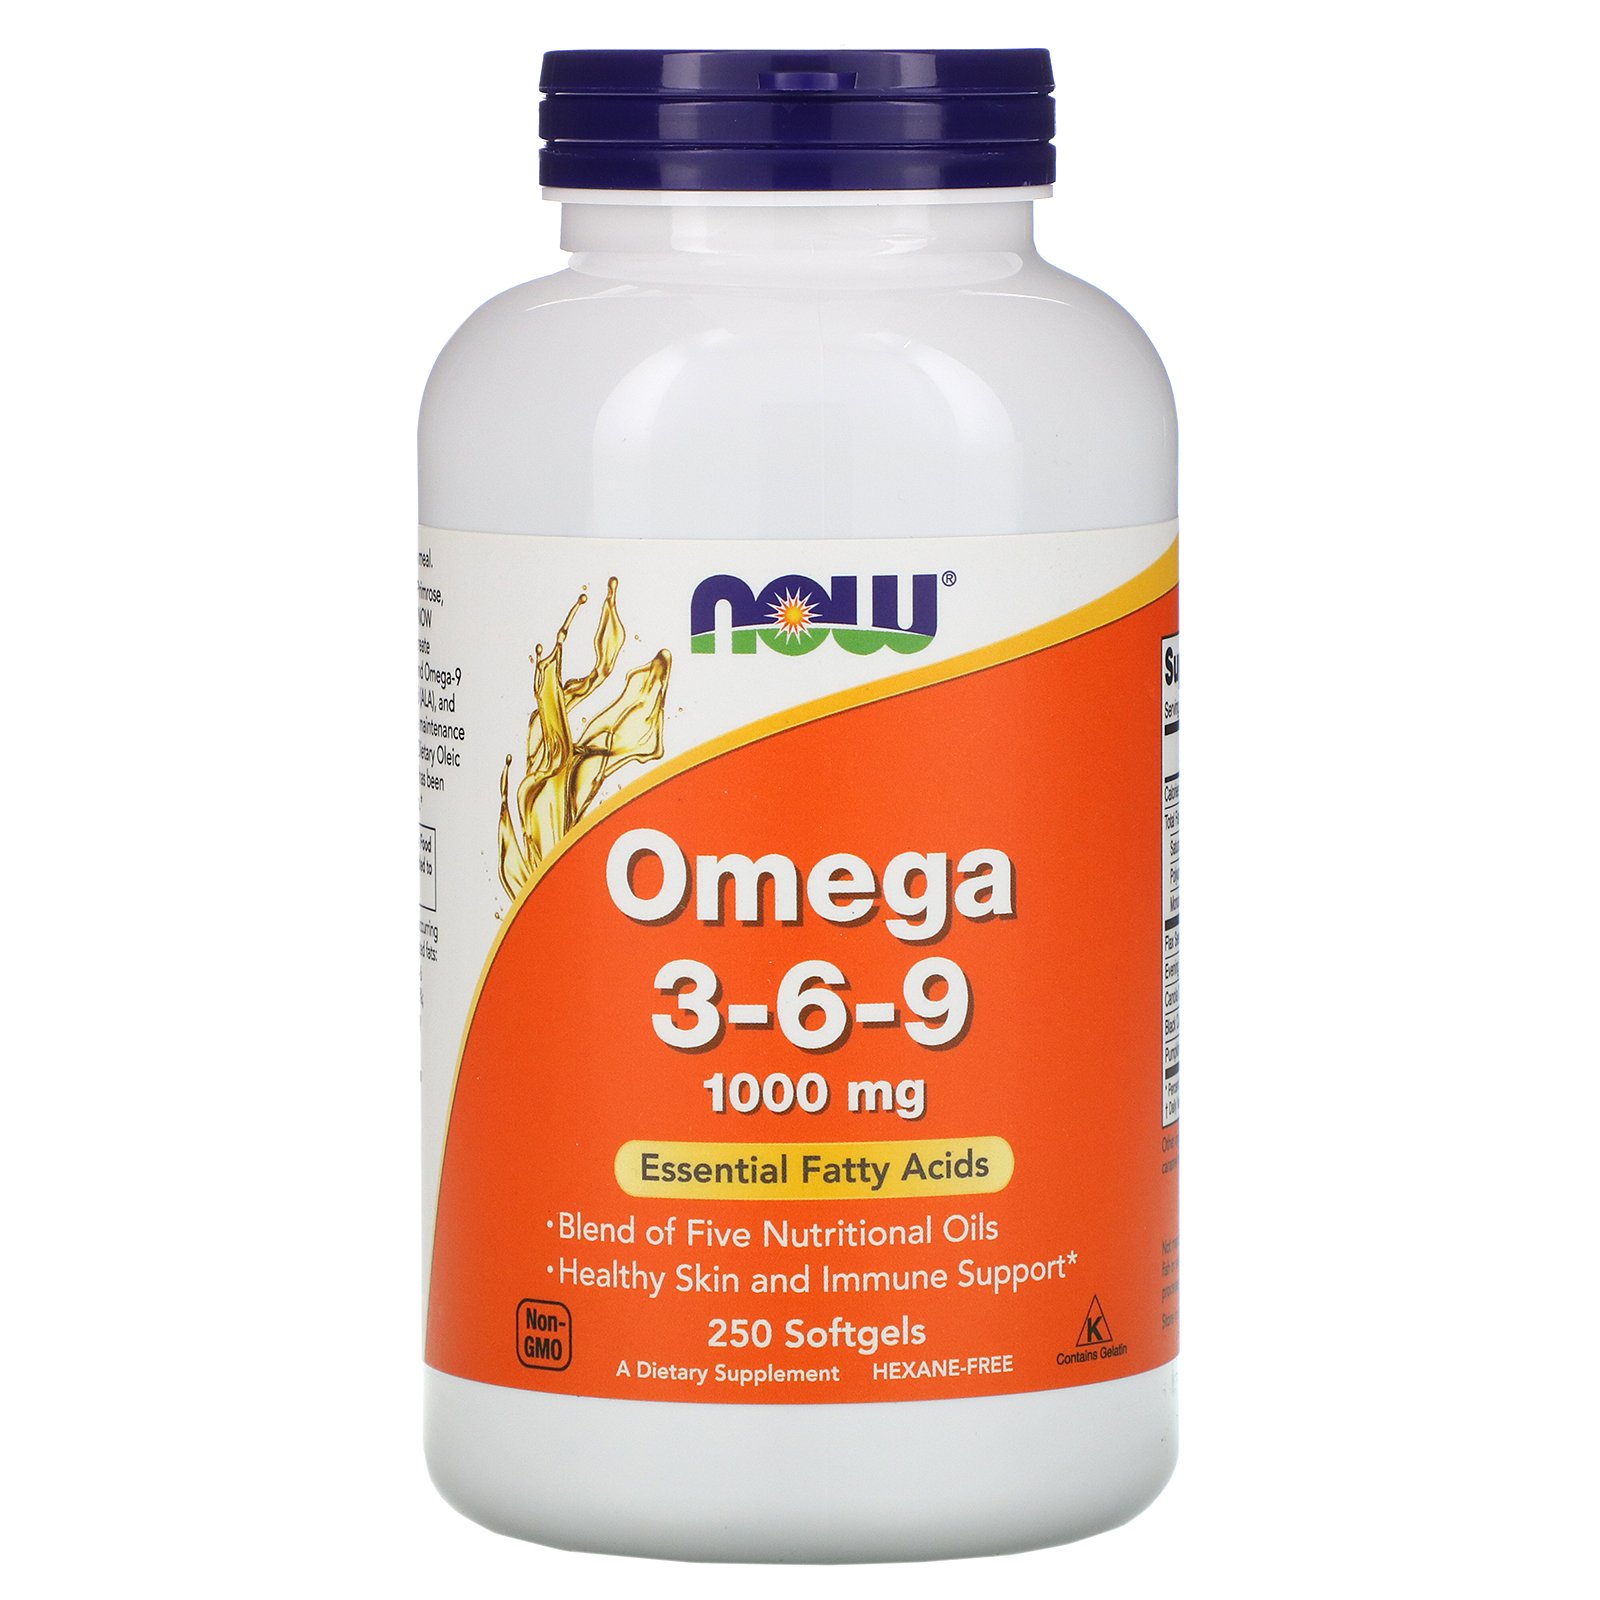 NOW Omega 3-6-9, Омега 3-6-9 1000 мг - 250 капсул